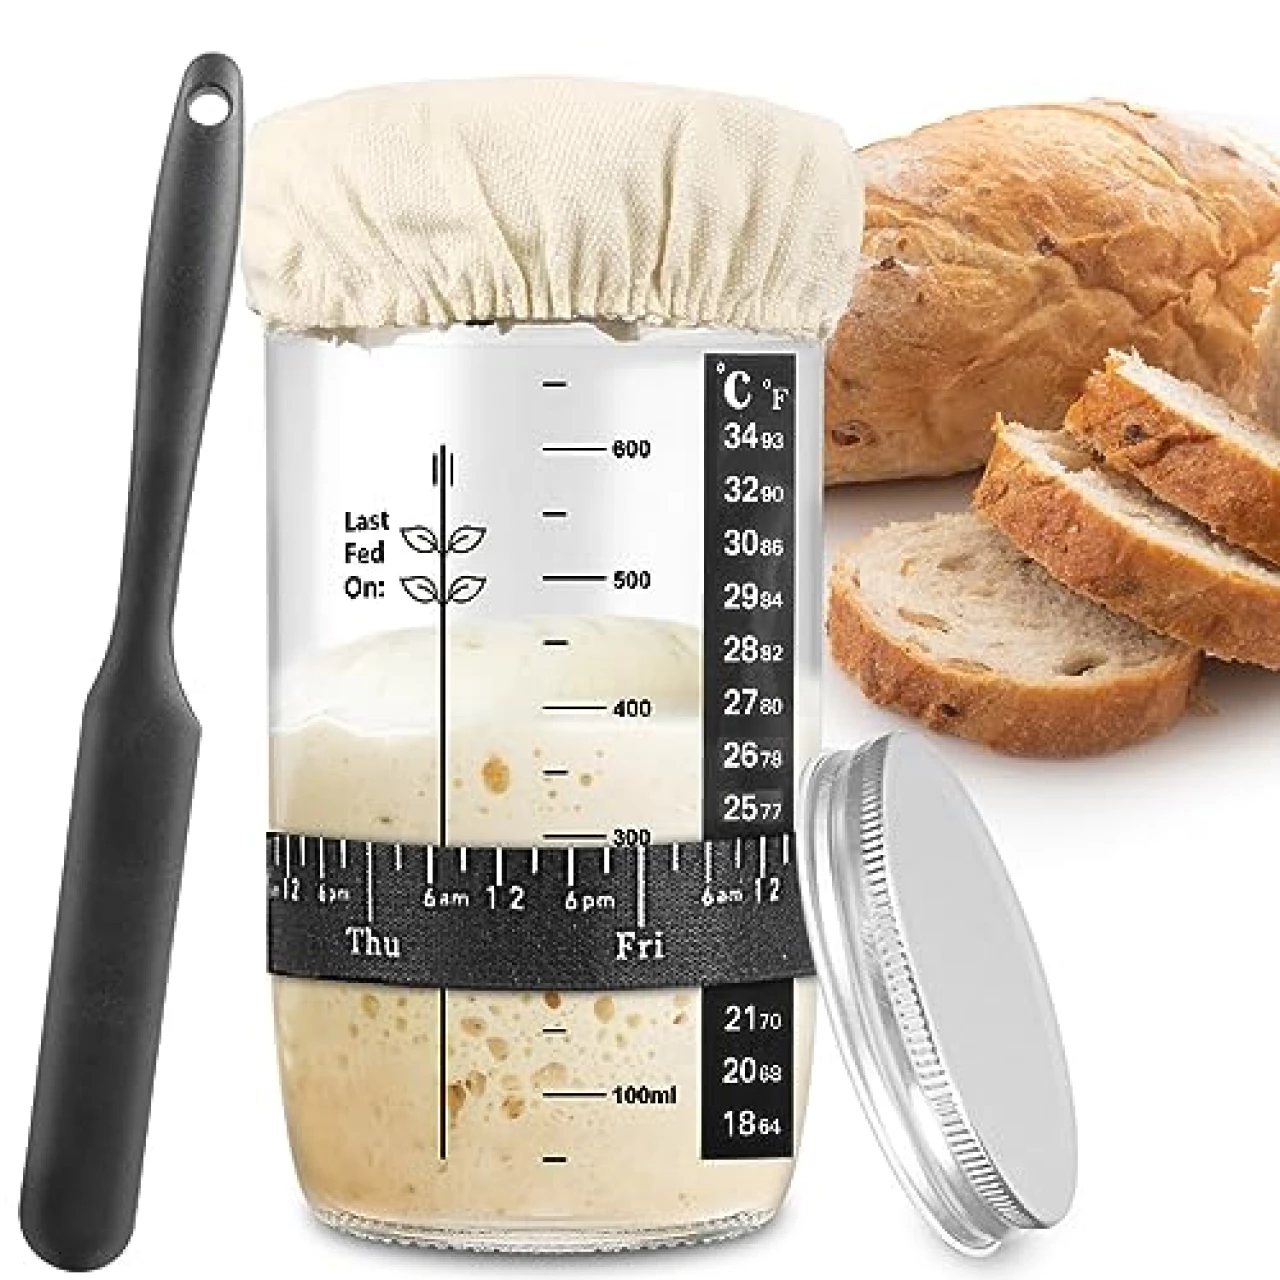 Zunmial Sourdough Starter Jar, Sourdough Starter Kit with Date Marked Feeding Band, Thermometer, Cloth Cover &amp; Metal Lid, Reusable Sourdough Bread Baking Supplies, Home Baking Supplies